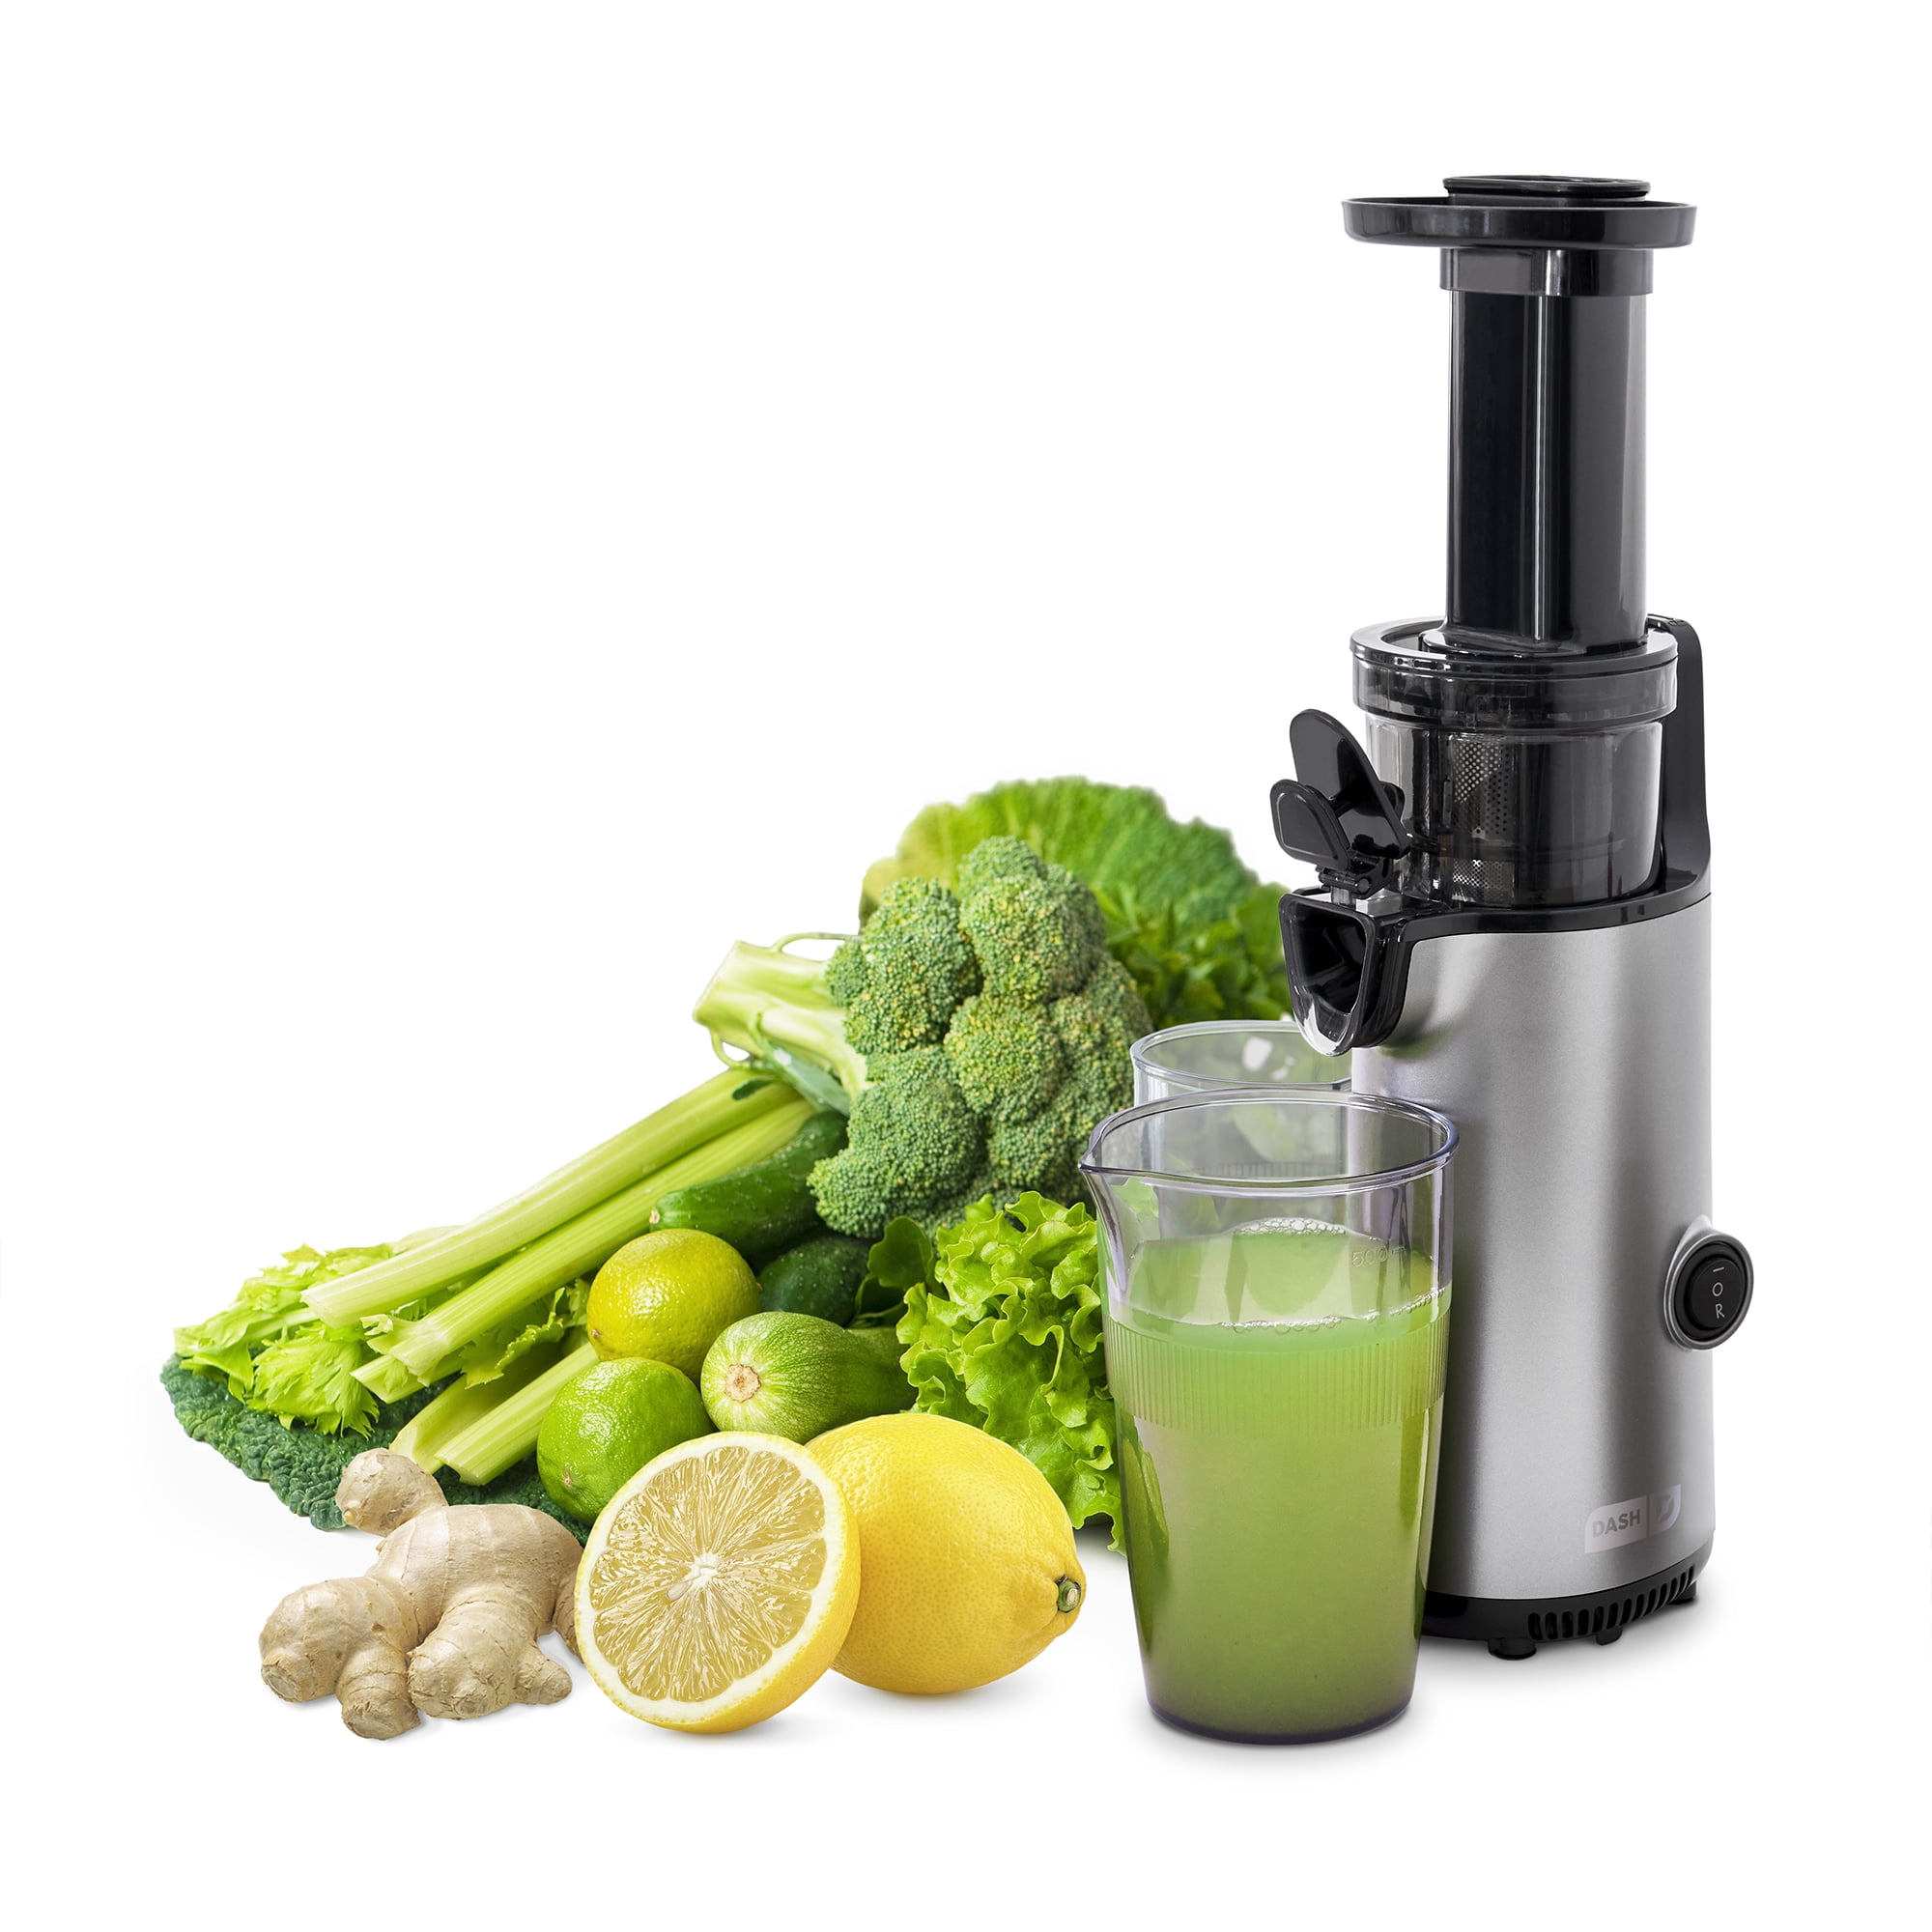 Dash Compact Centrifugal Juicer, Press Juicing Machine, 2-Speed, 2 Wide Feed Chute for Whole Fruit Vegetable, Anti-Drip, Stainless Steel Sieve - Cool